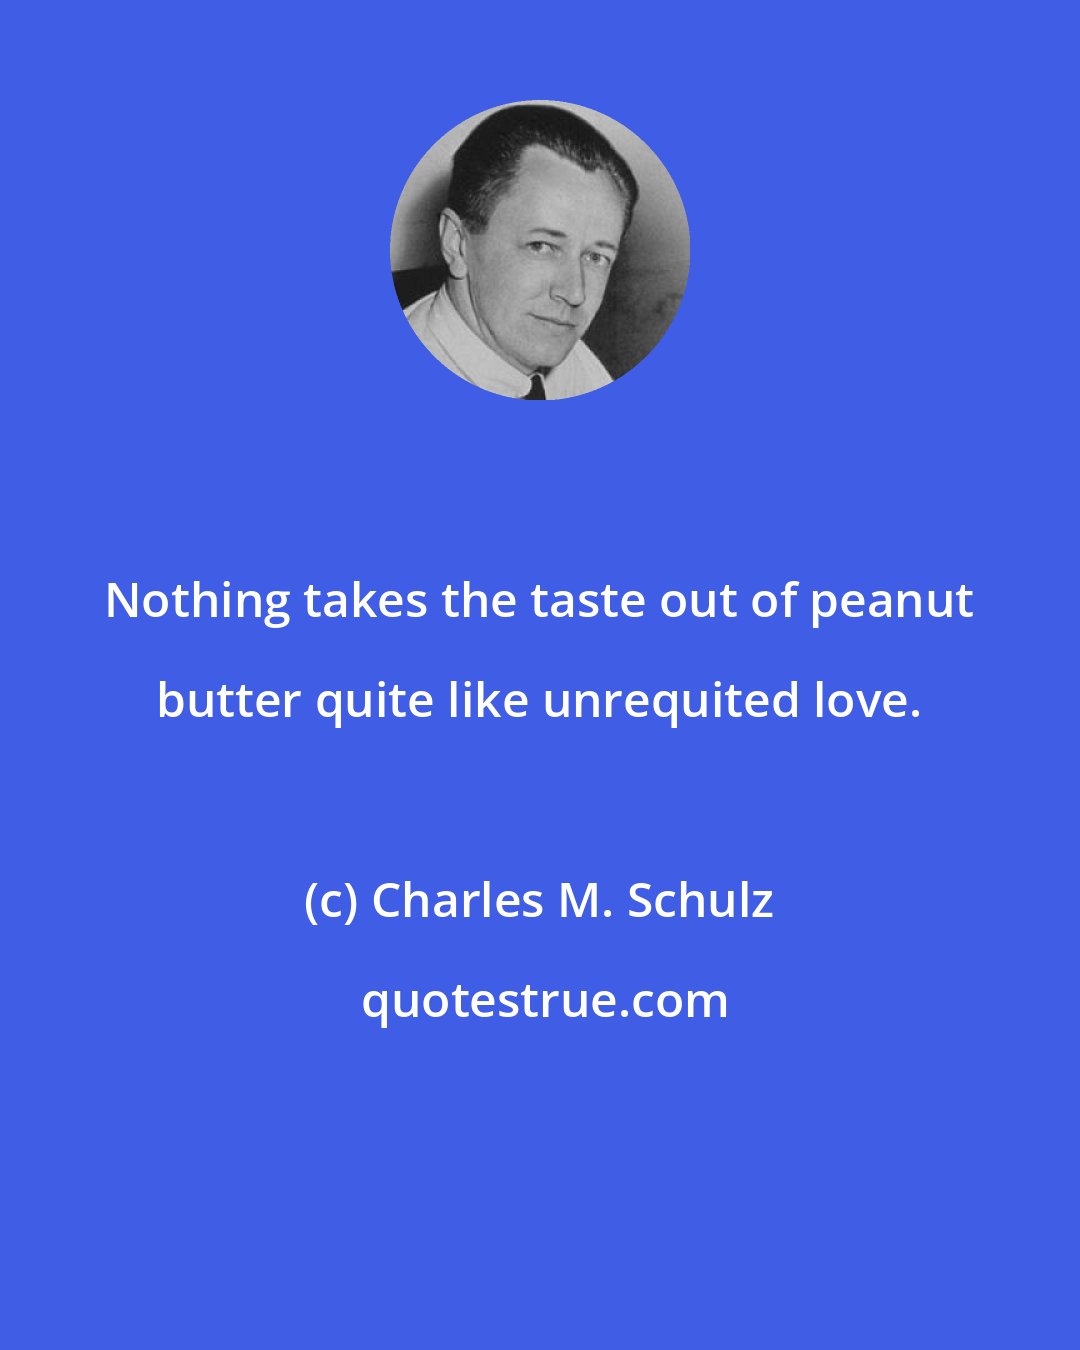 Charles M. Schulz: Nothing takes the taste out of peanut butter quite like unrequited love.